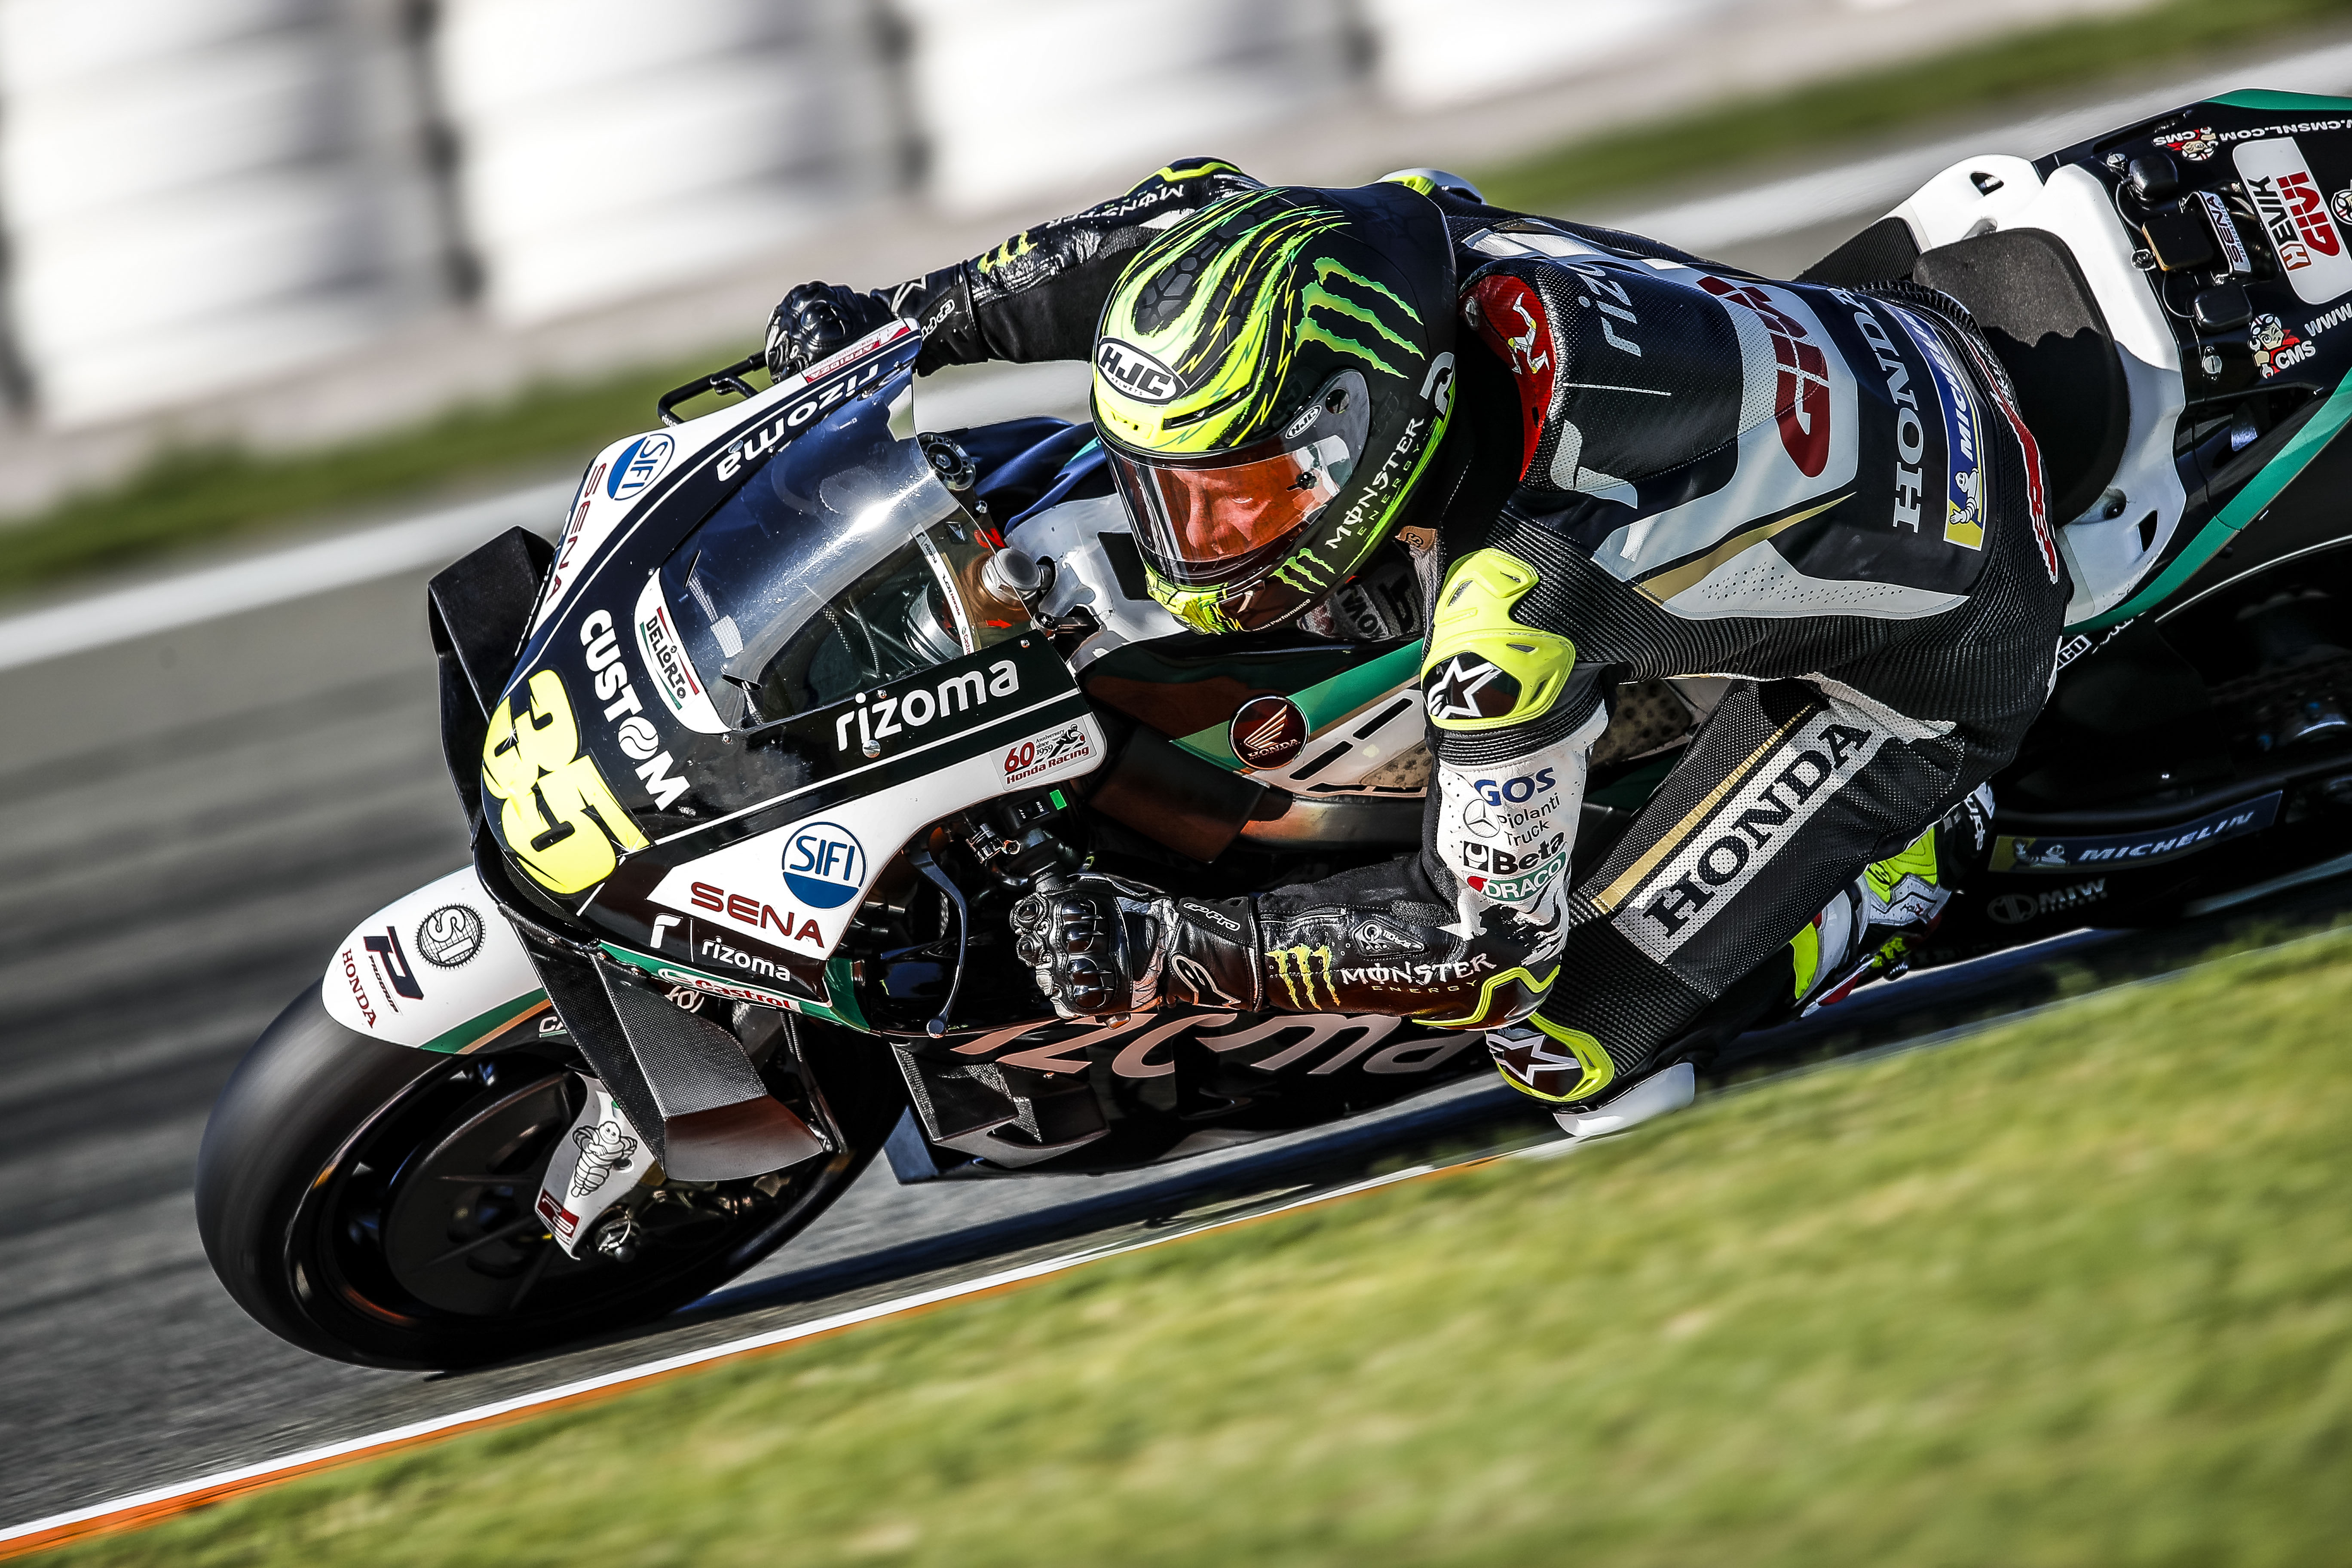 Early end for Crutchlow in Valencia